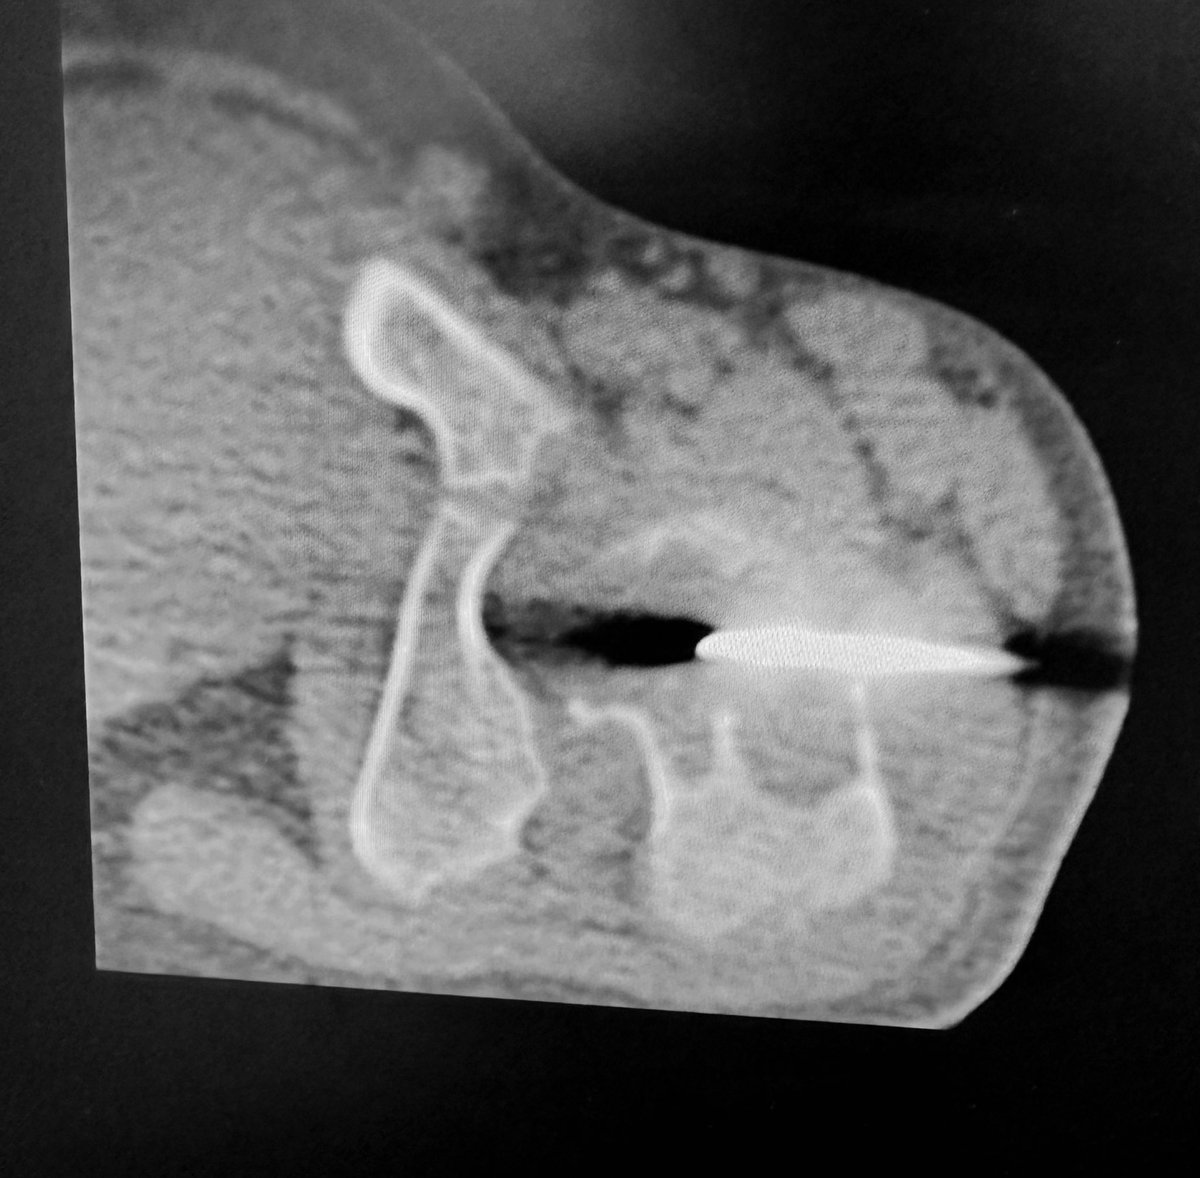 Aneurysmal bone cyst steroid injection. #InterventionalRadiology #irad #radtwitter #MedTwitter #radres